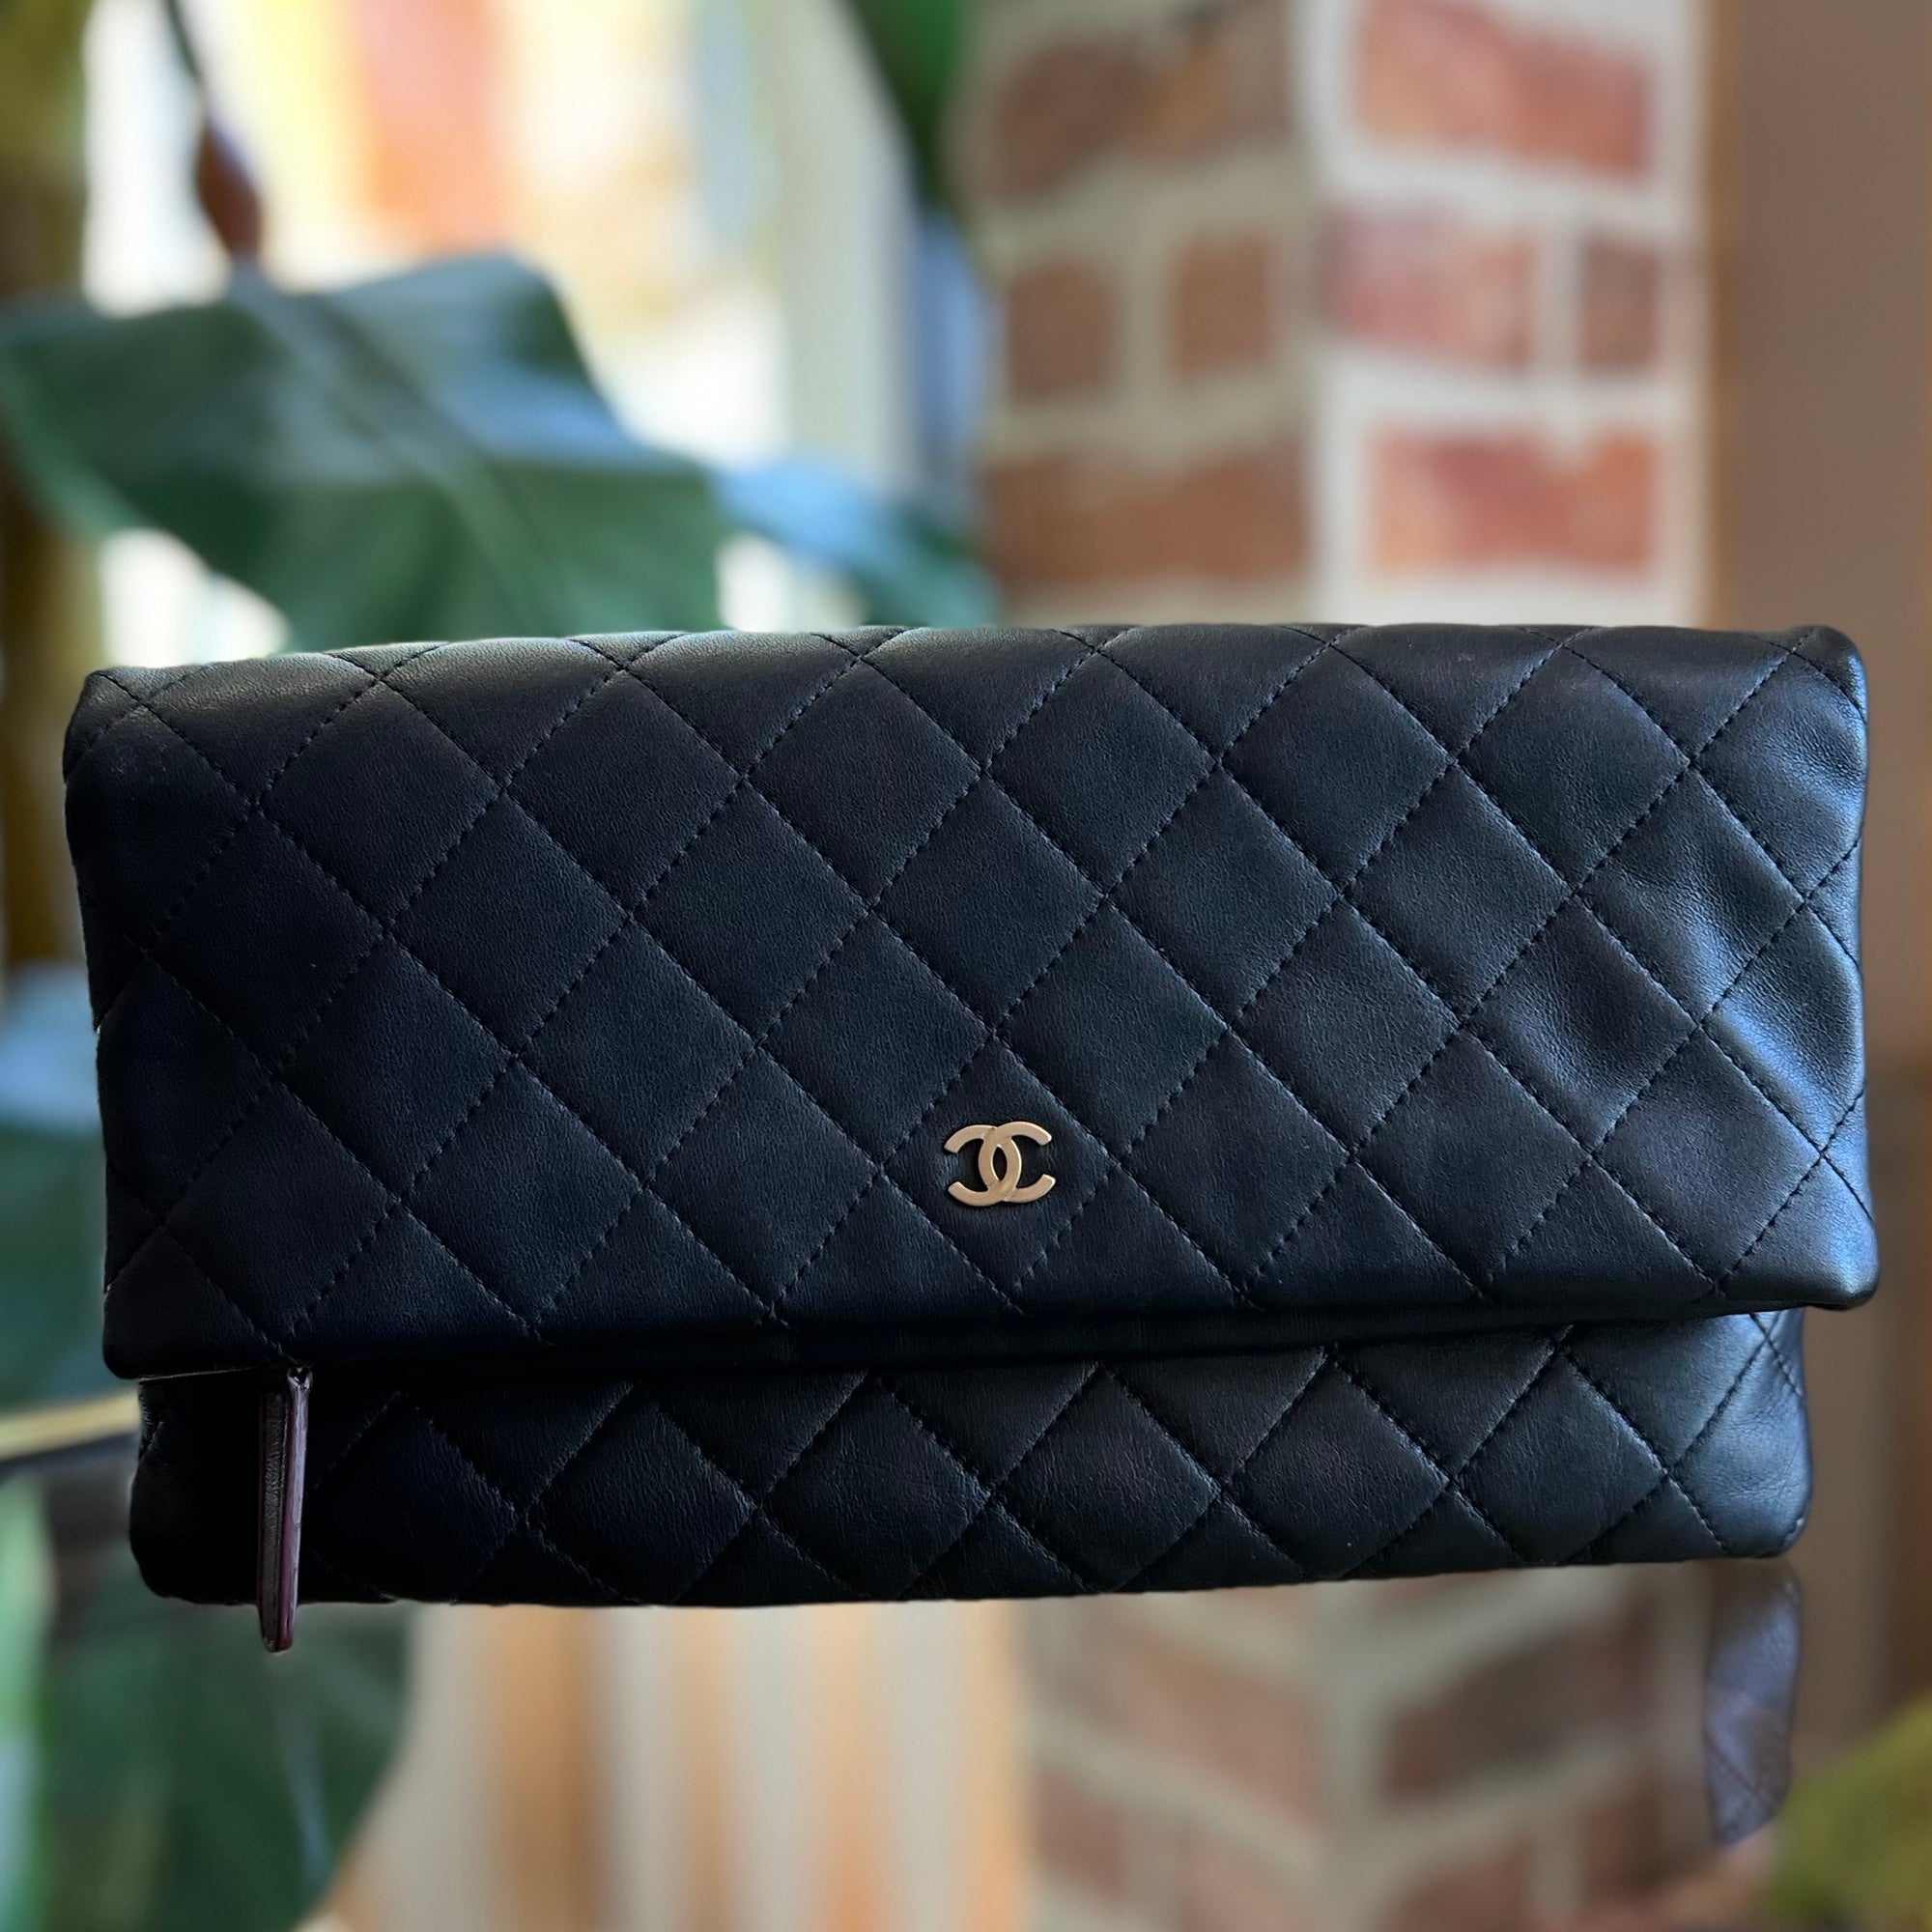 CHANEL Black Lambskin Quilted Leather Beauty Fold Over Clutch TS3177